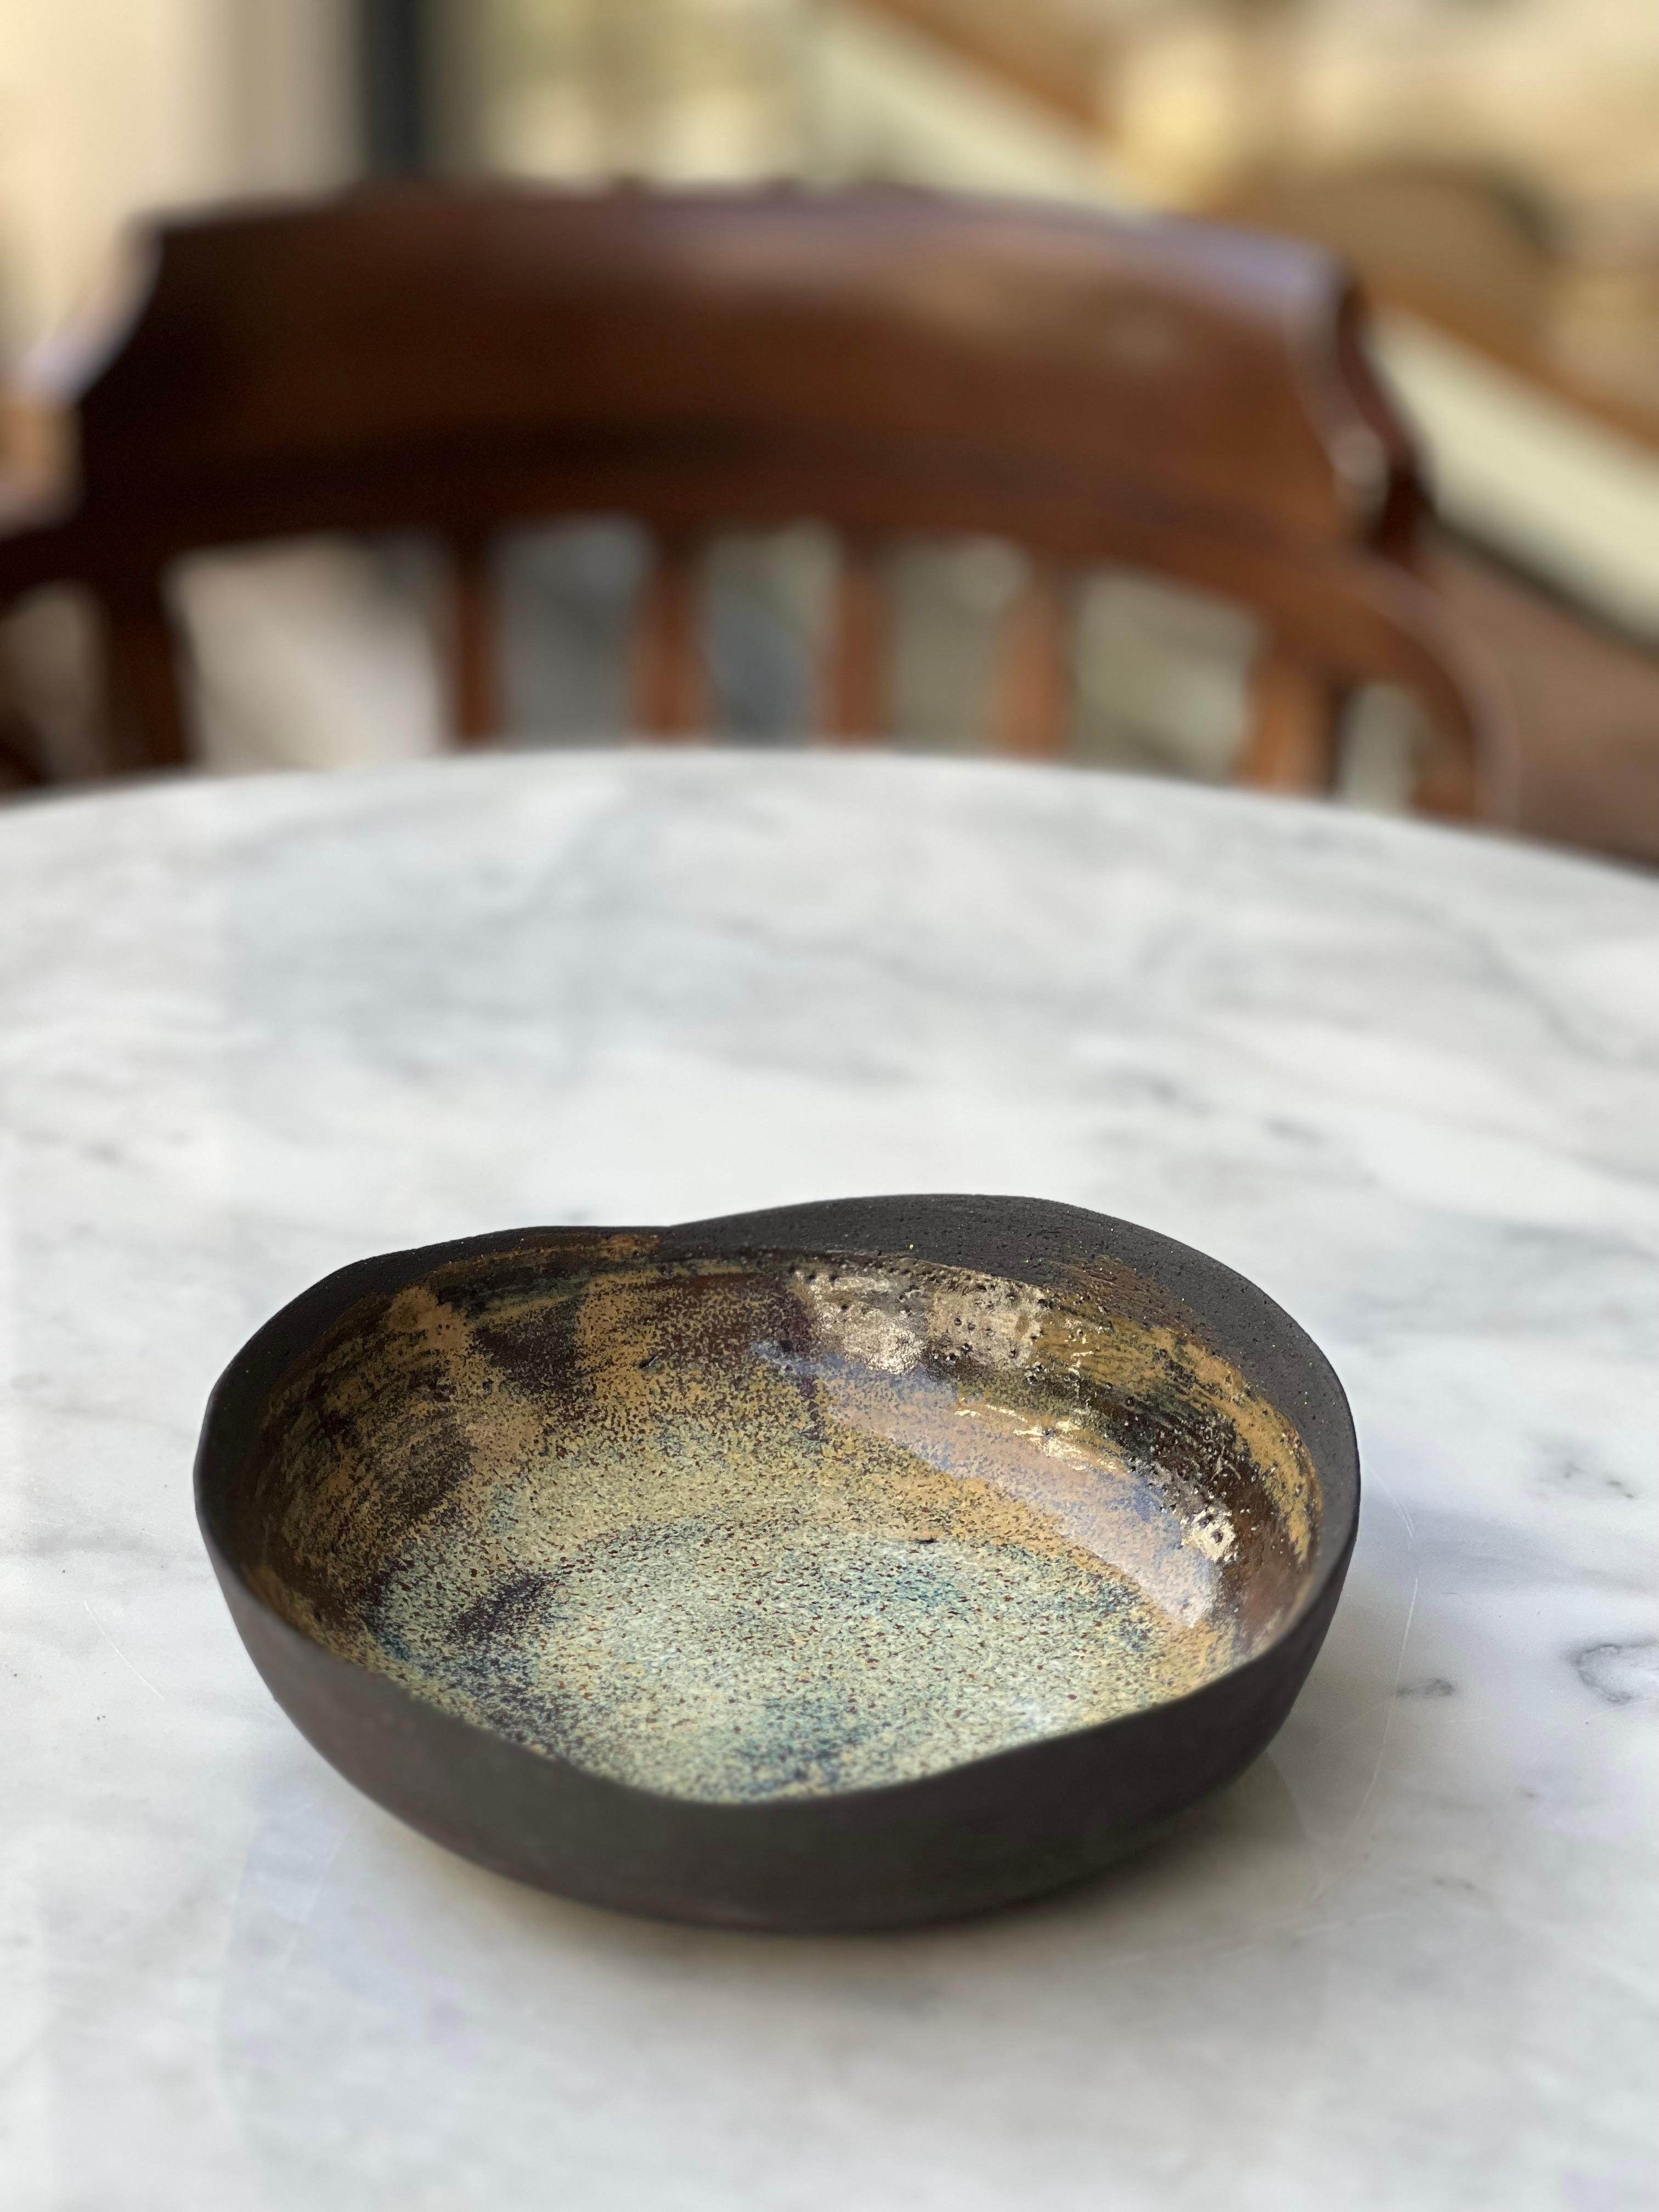 Turquoise Wave Plate by Güler Elçi
Dimensions: D 16 x H 3.8 cm
Materials: Stoneware Ceramic, Food Safe Glaze.

Güler Elçi is a ceramic artist based in Istanbul. In the light of her engineering career, she considers ceramics as a material and likes